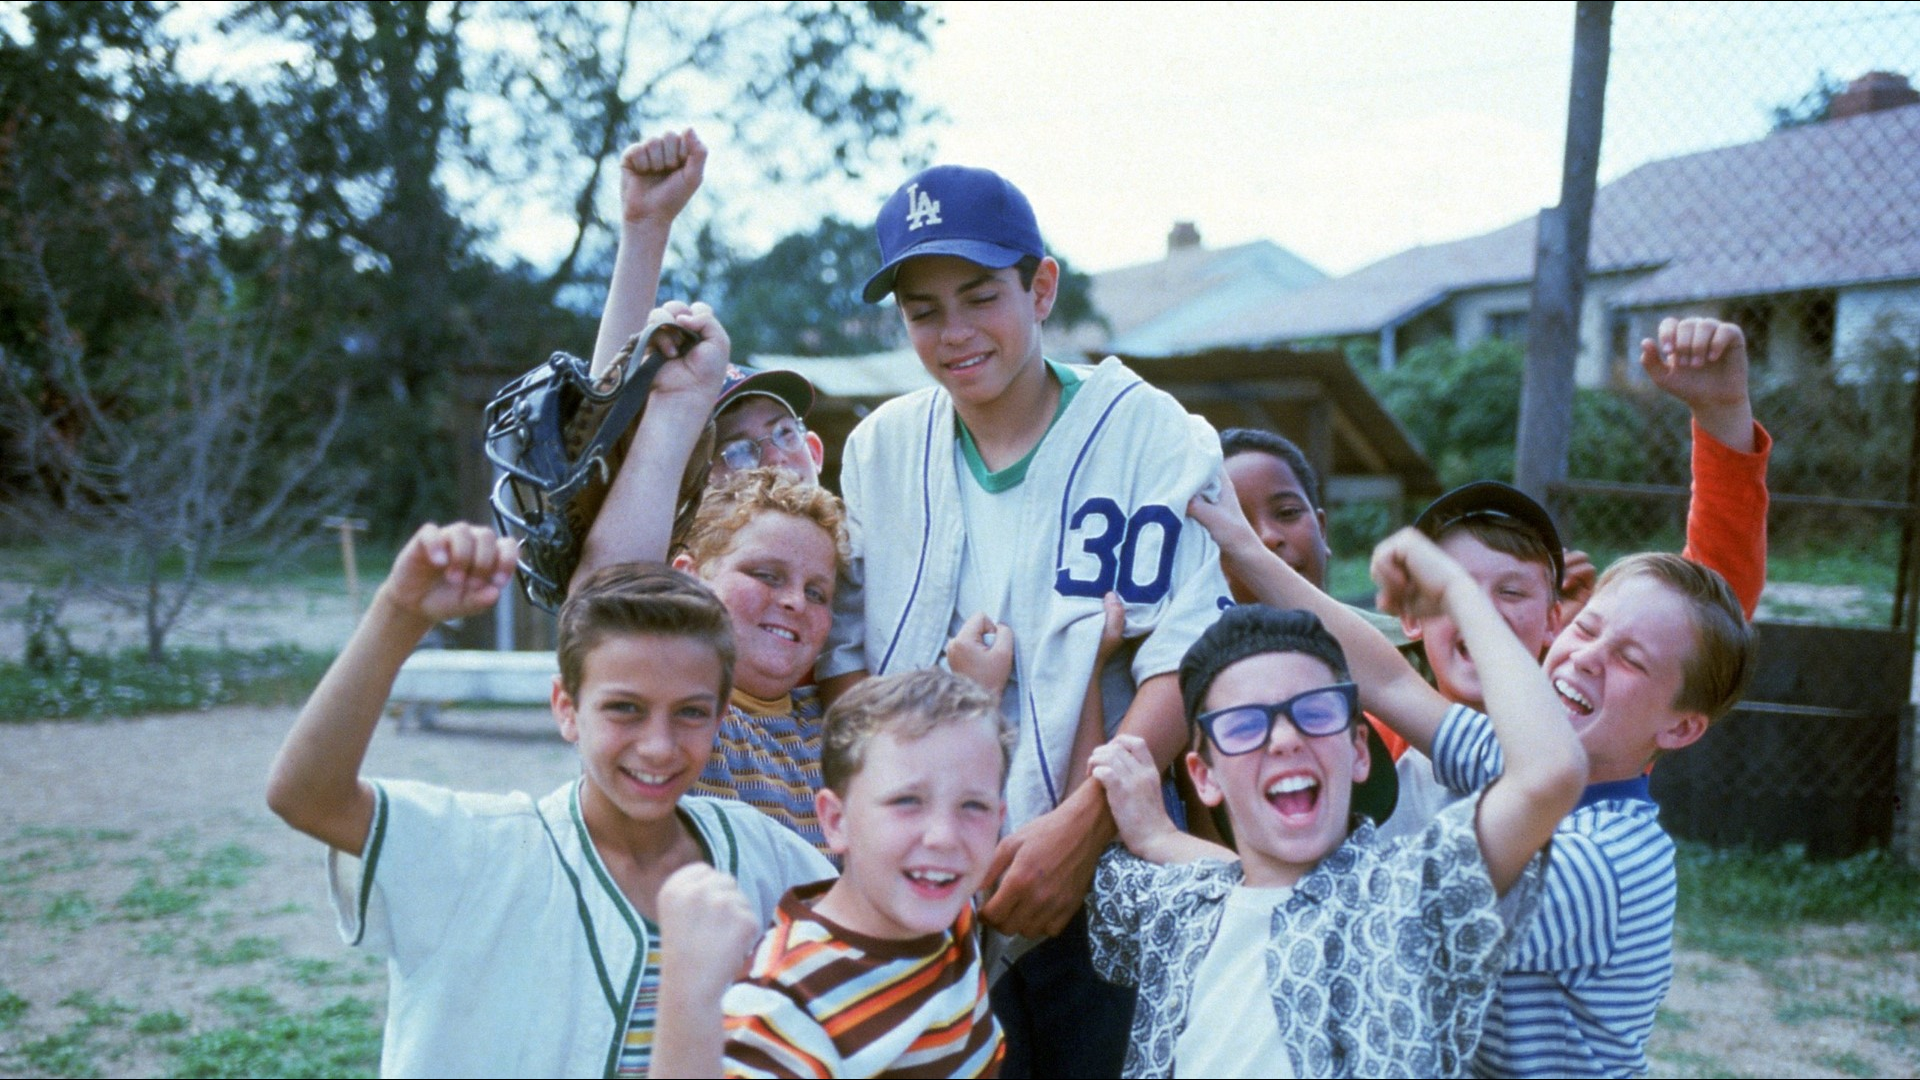 Members of the cast of the original Sandlot movie will be at the 'Ultimate Sandlot Movie Party' at Treaty Oak Distilling in Dripping Springs.